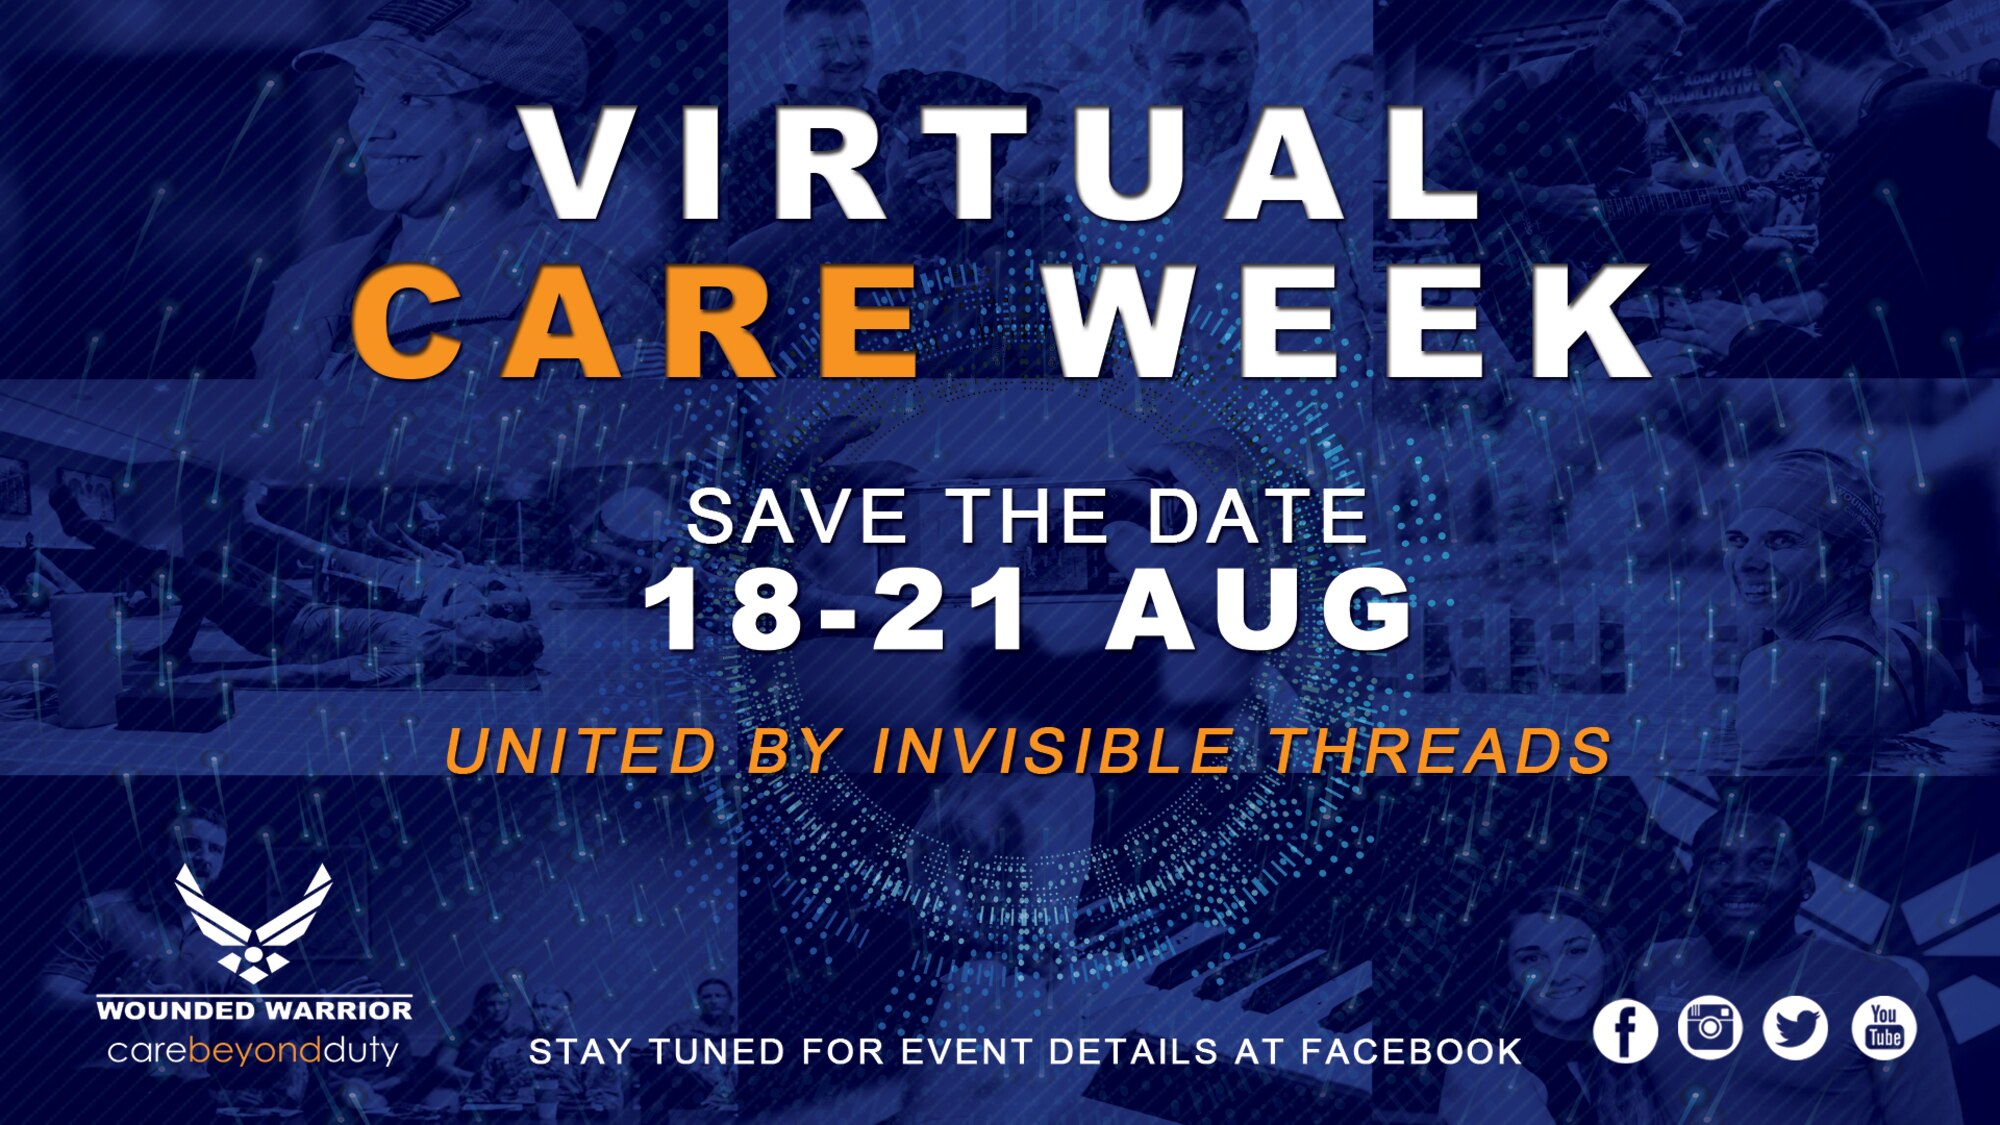 With everything going on in the world right now, staying connected can be almost impossible due to the virus, and the distancing that must be adhered to as a result. Now, more than ever, our Warriors need unbreakable connections and we have an answer. AFW2 will host its first ever Virtual CARE Week, August 18-21.(U.S. Air Force Graphic by Melissa Espinales)